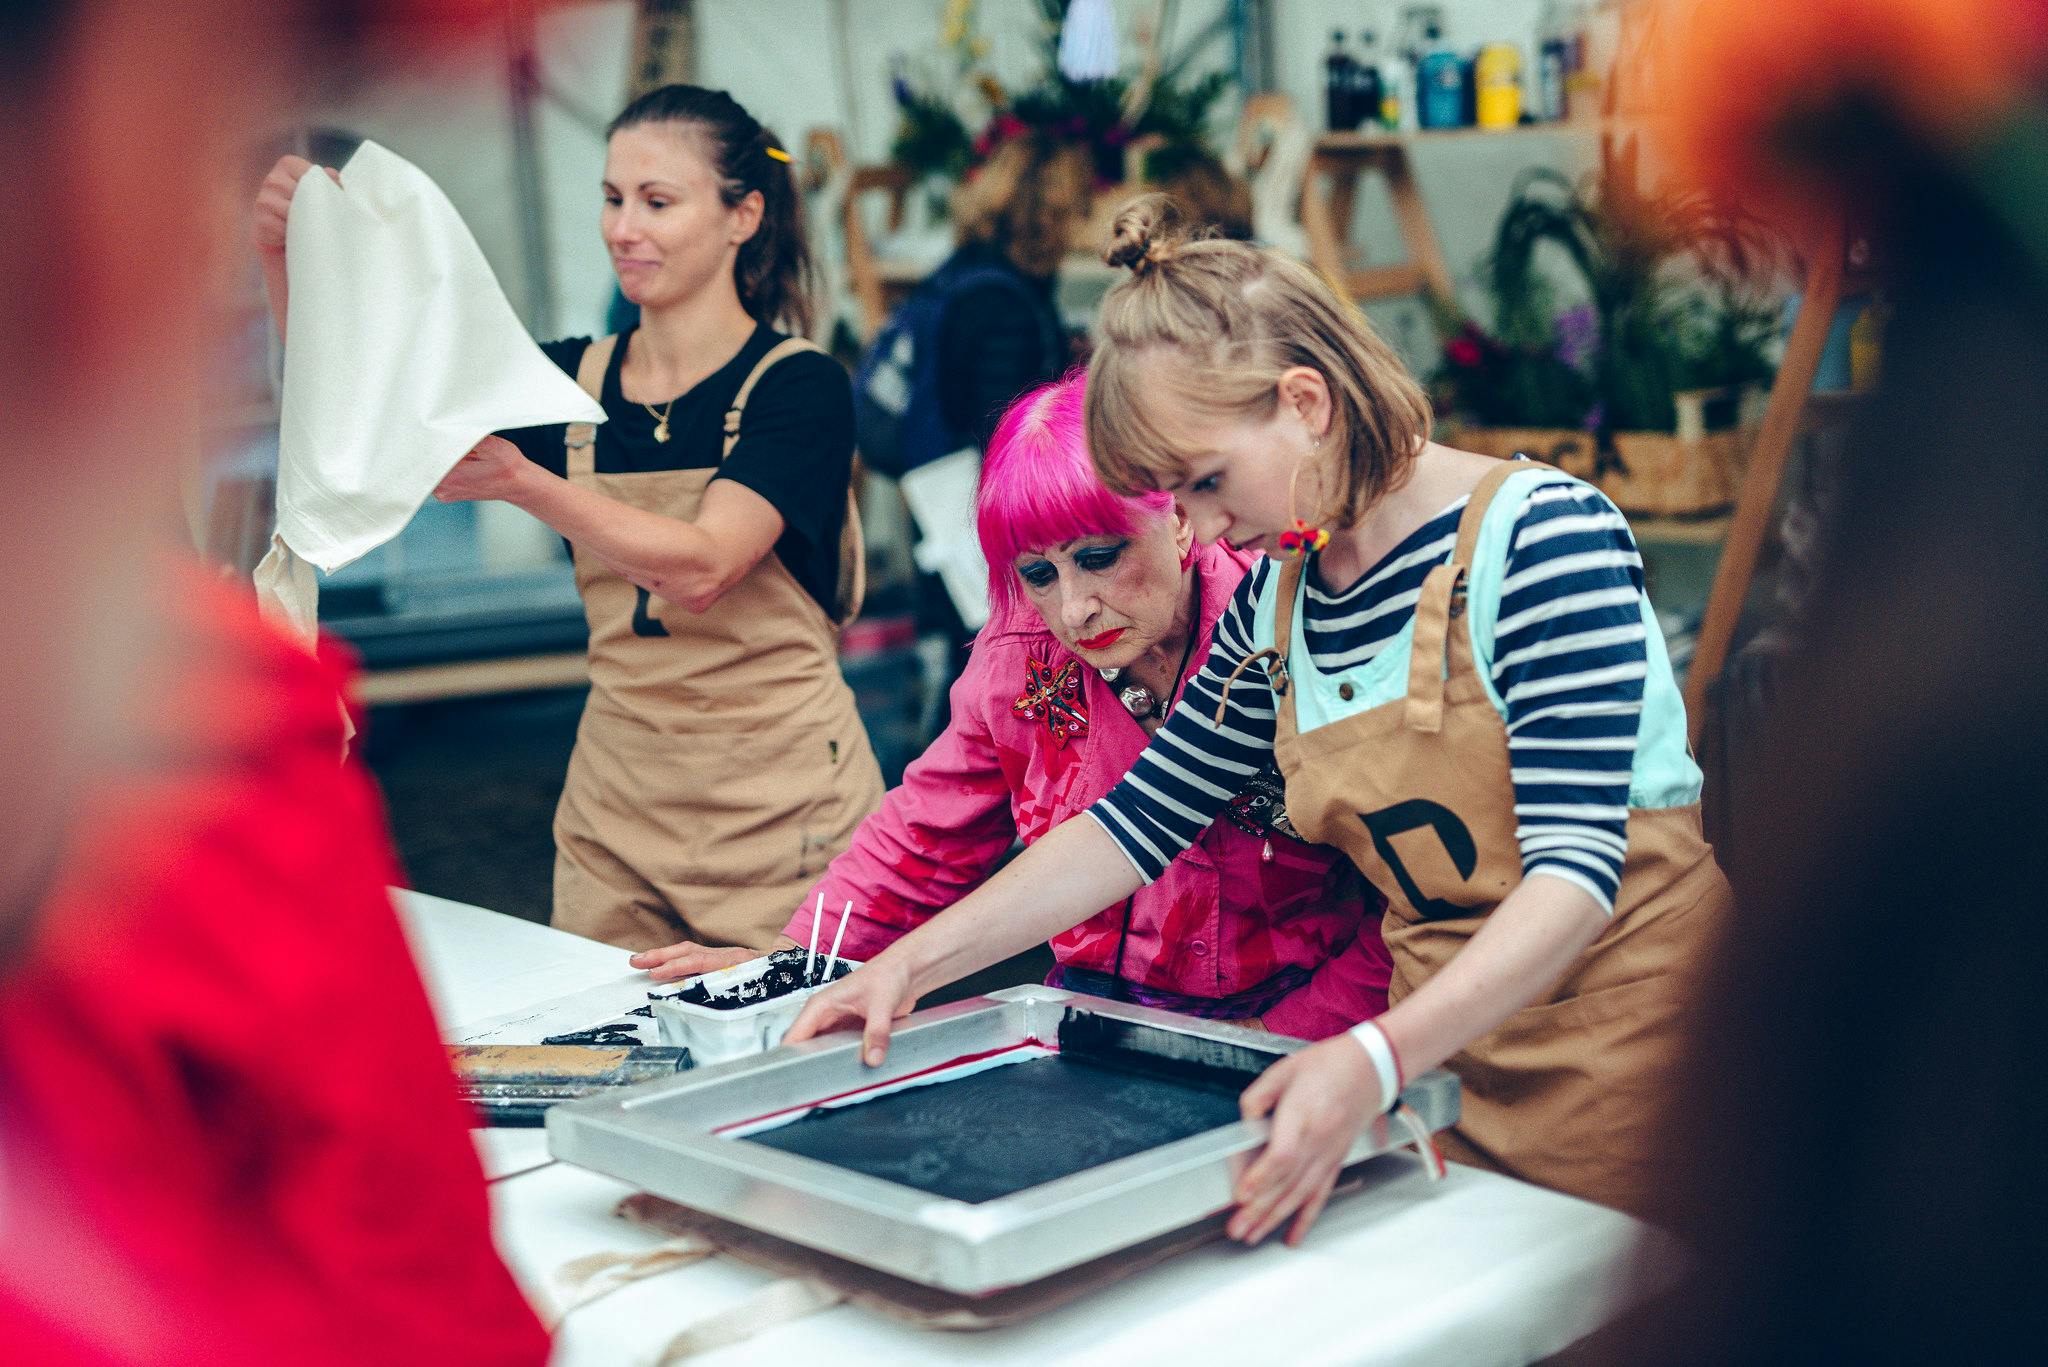 Fashion and textile designer Zhandra Rhodes sporting hot pink hair and a matching pink boilersuit leads a screenprinting demonstration within a busy festiva tent, surrounded by plants and art supplies.